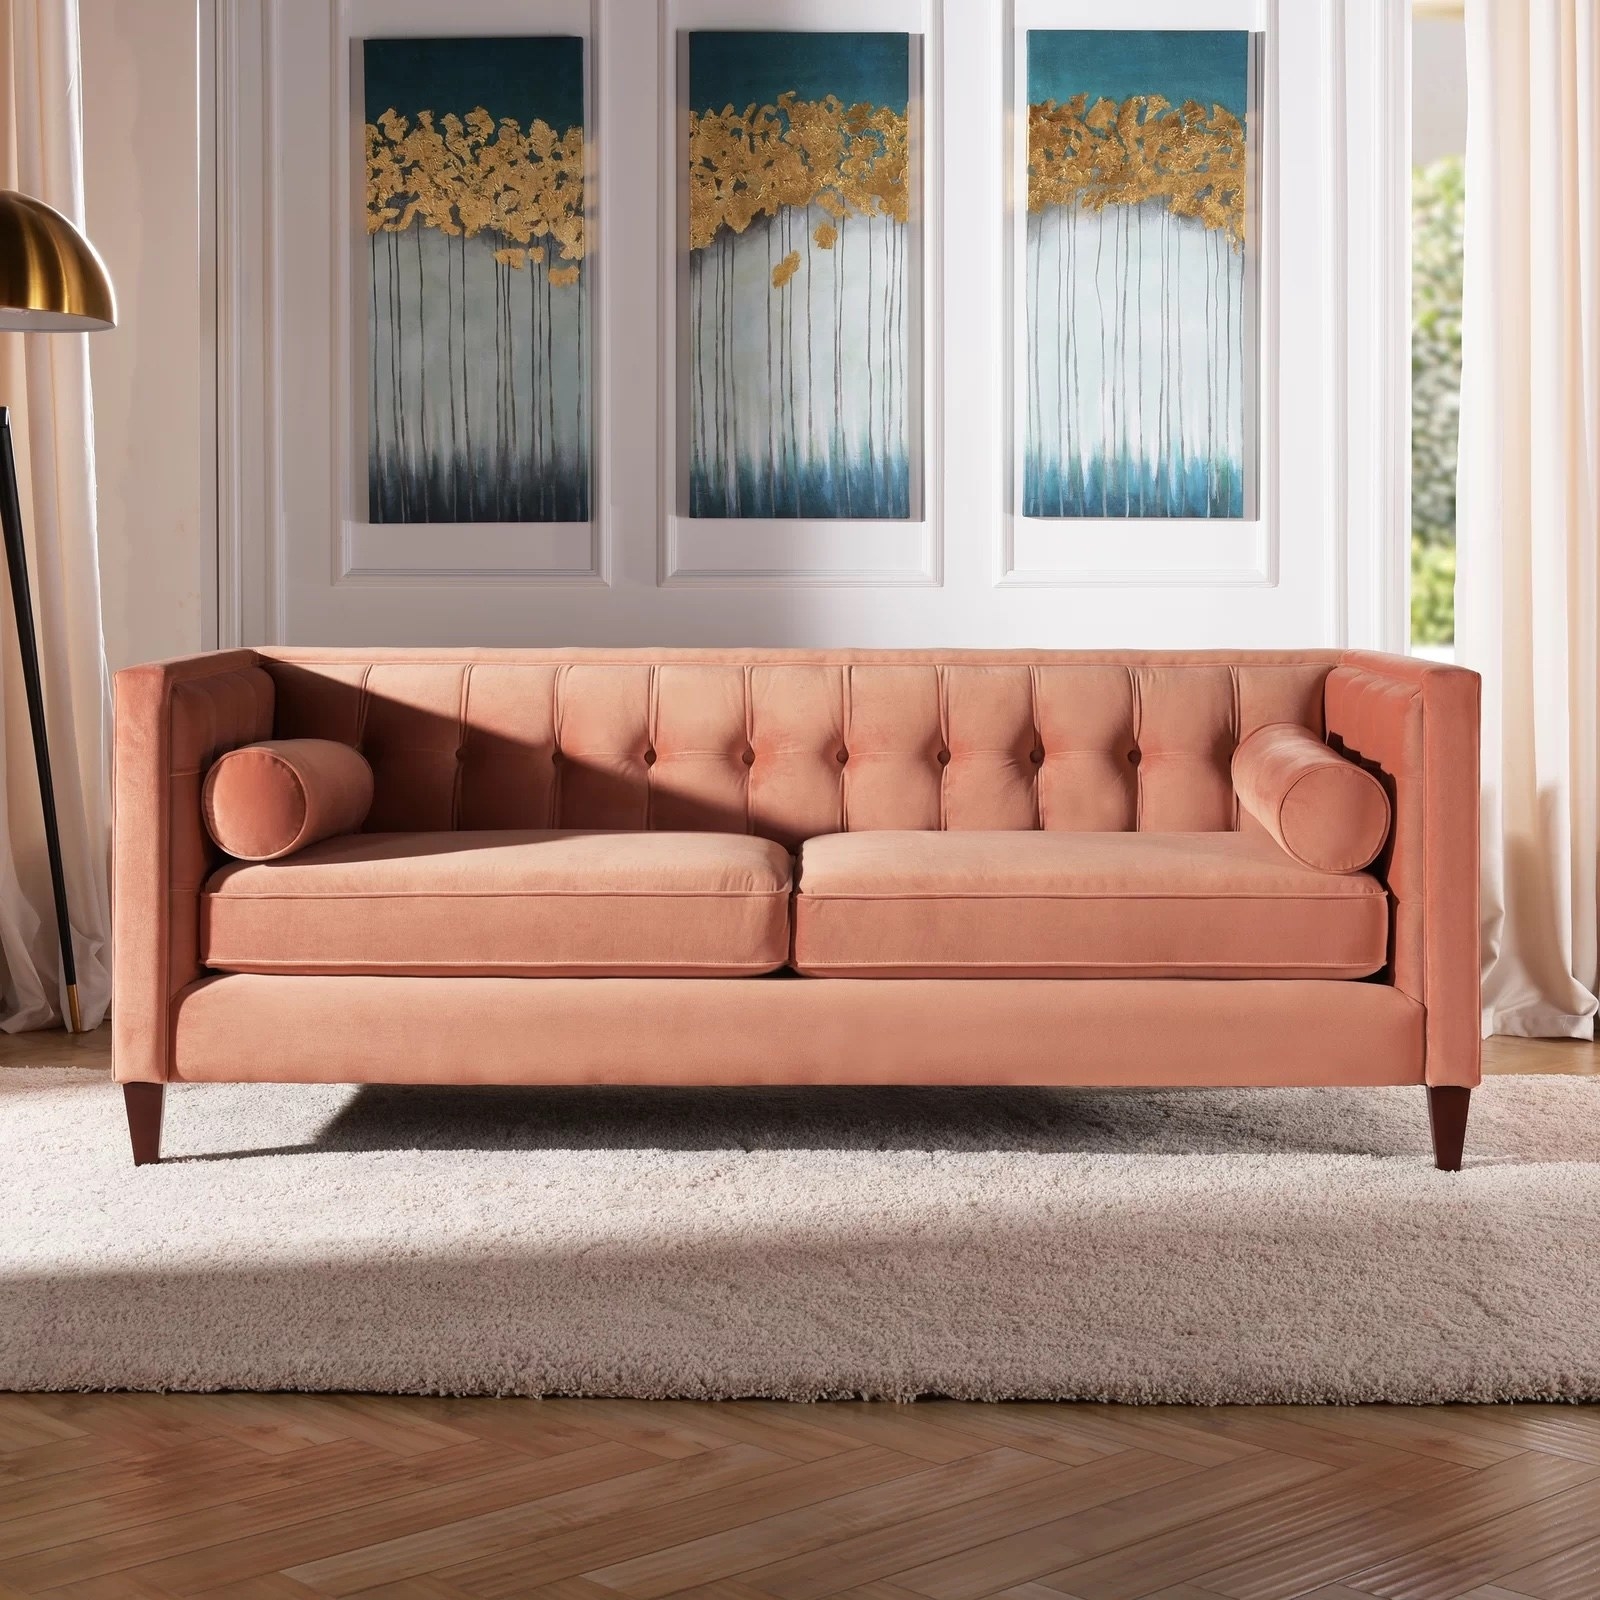 the velvet couch in an orange color